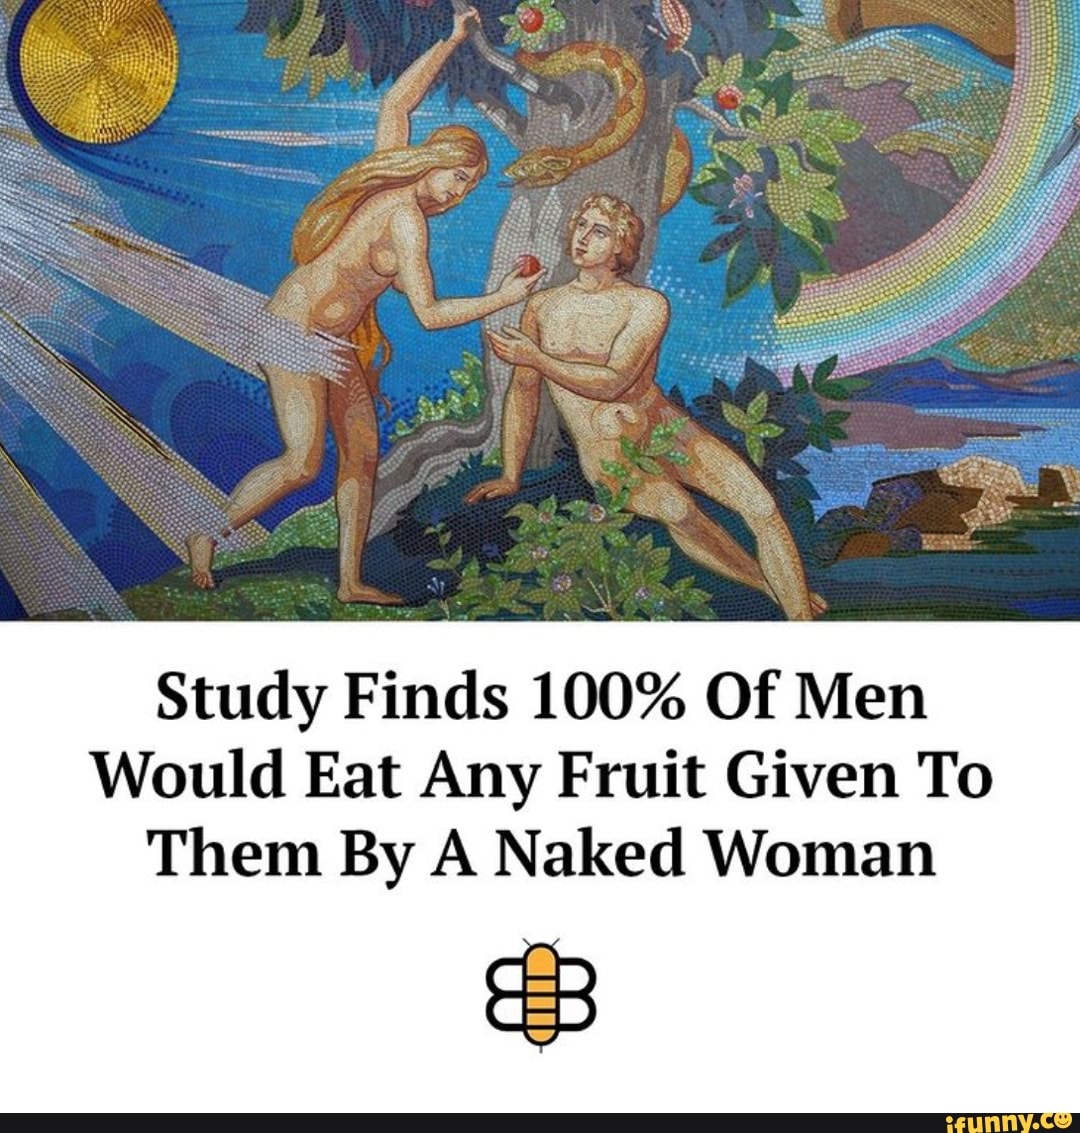 Study Finds That Women Like Looking At Naked Women As Much As